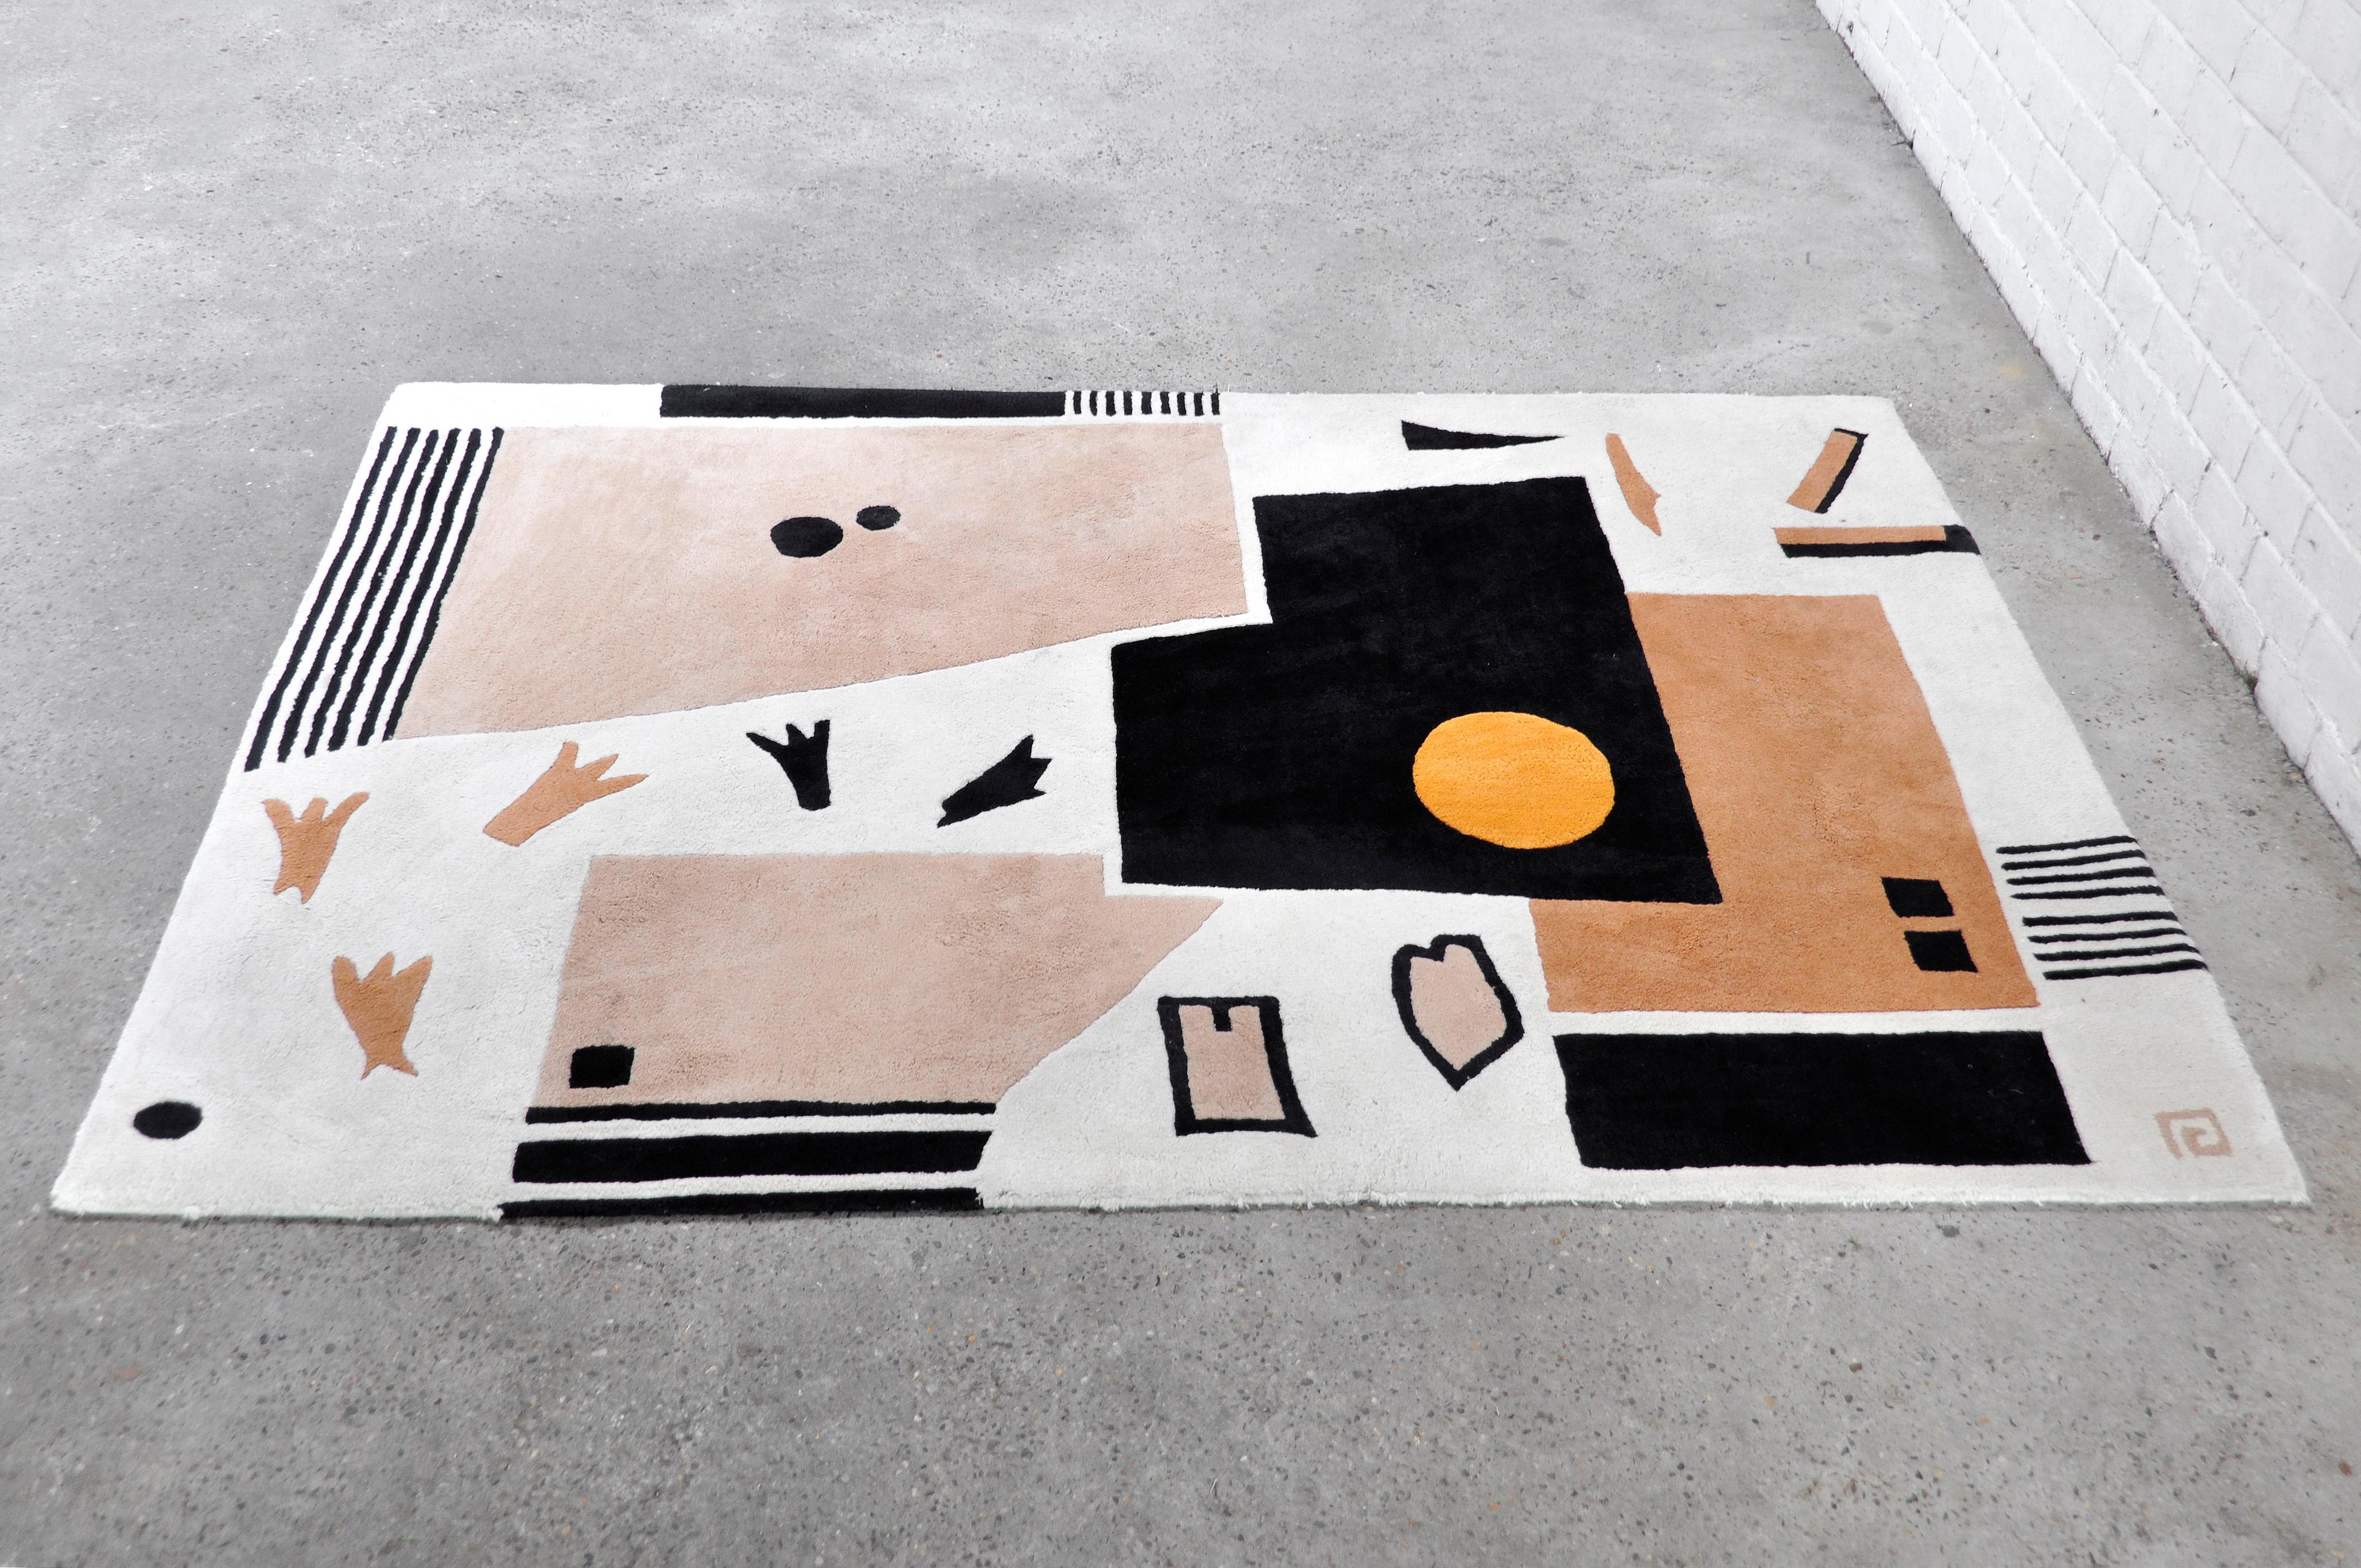 Beautiful high quality rug with abstract geometric design in bauhaus manner. Made out of handwoven wool. Marked on backside but brand unreadable. In very good condition with only light signs of pre-use.